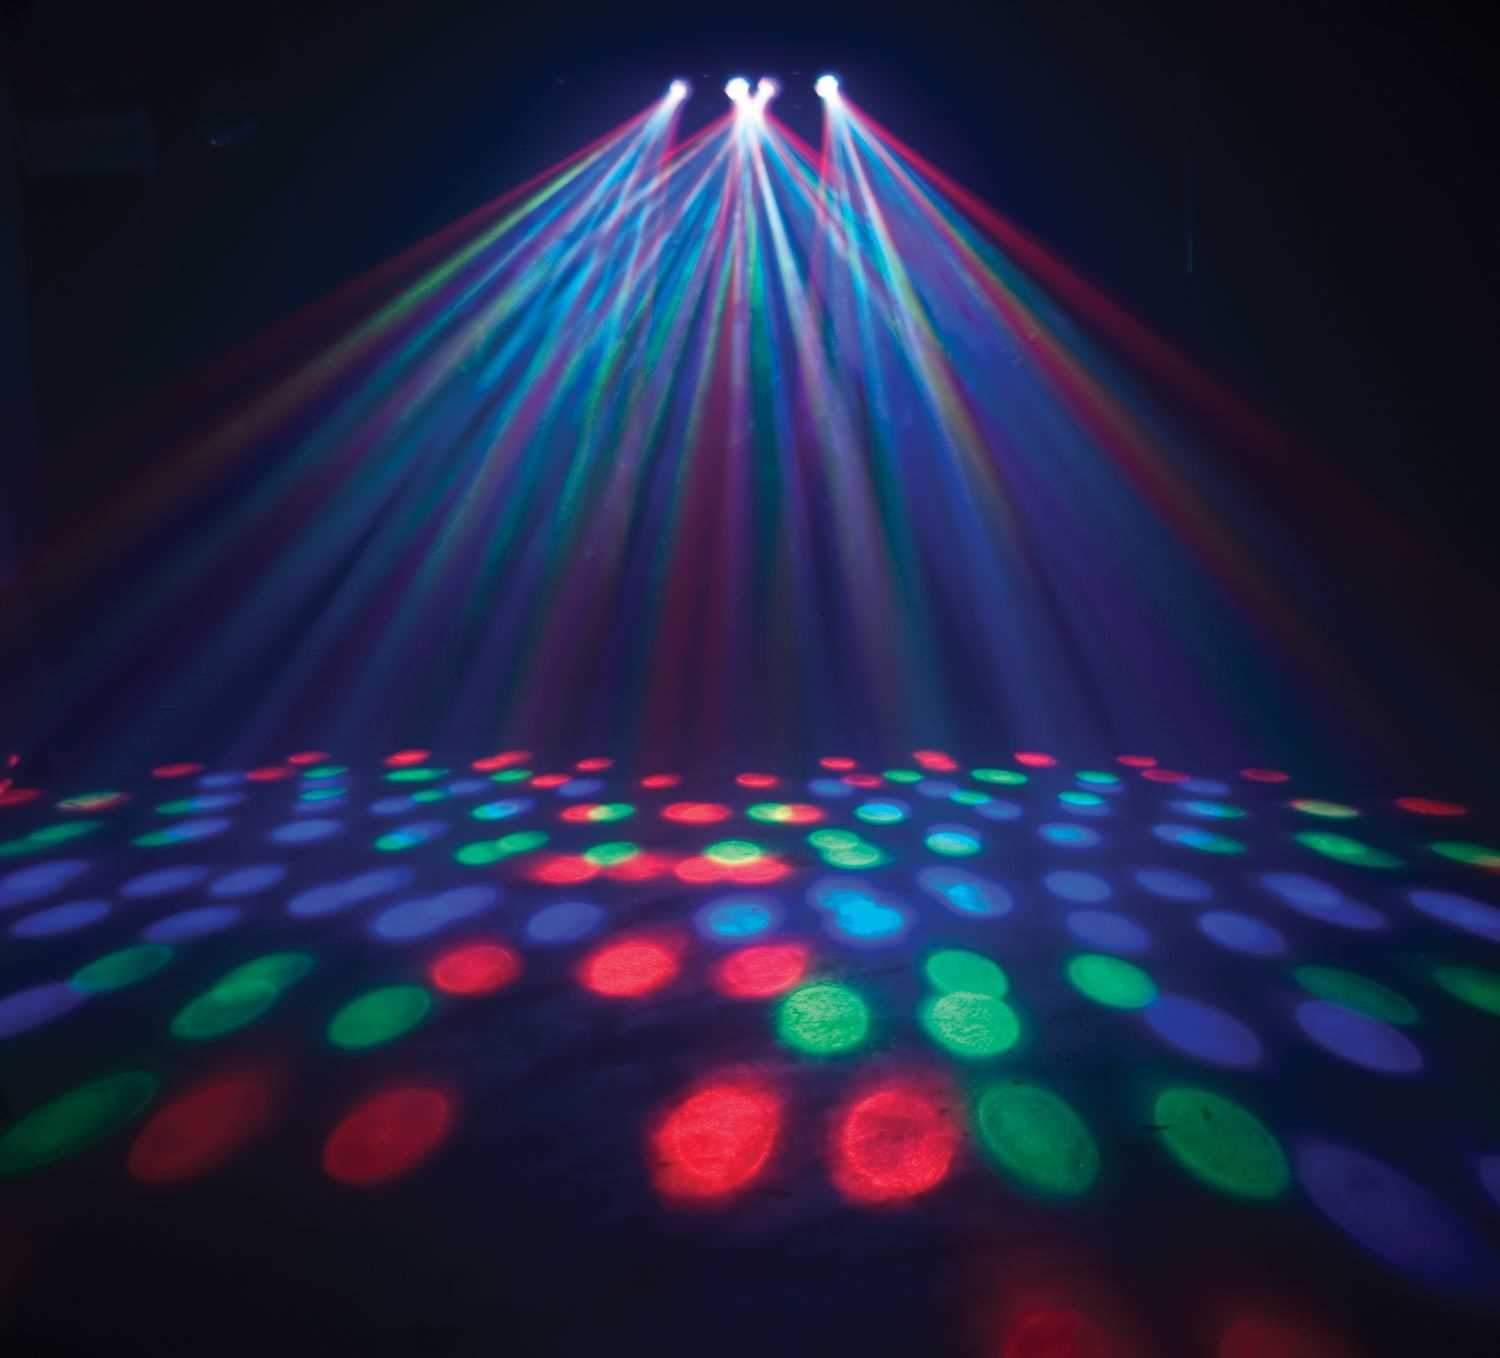 American DJ Majestic LED DMX Moonflower Effect - PSSL ProSound and Stage Lighting